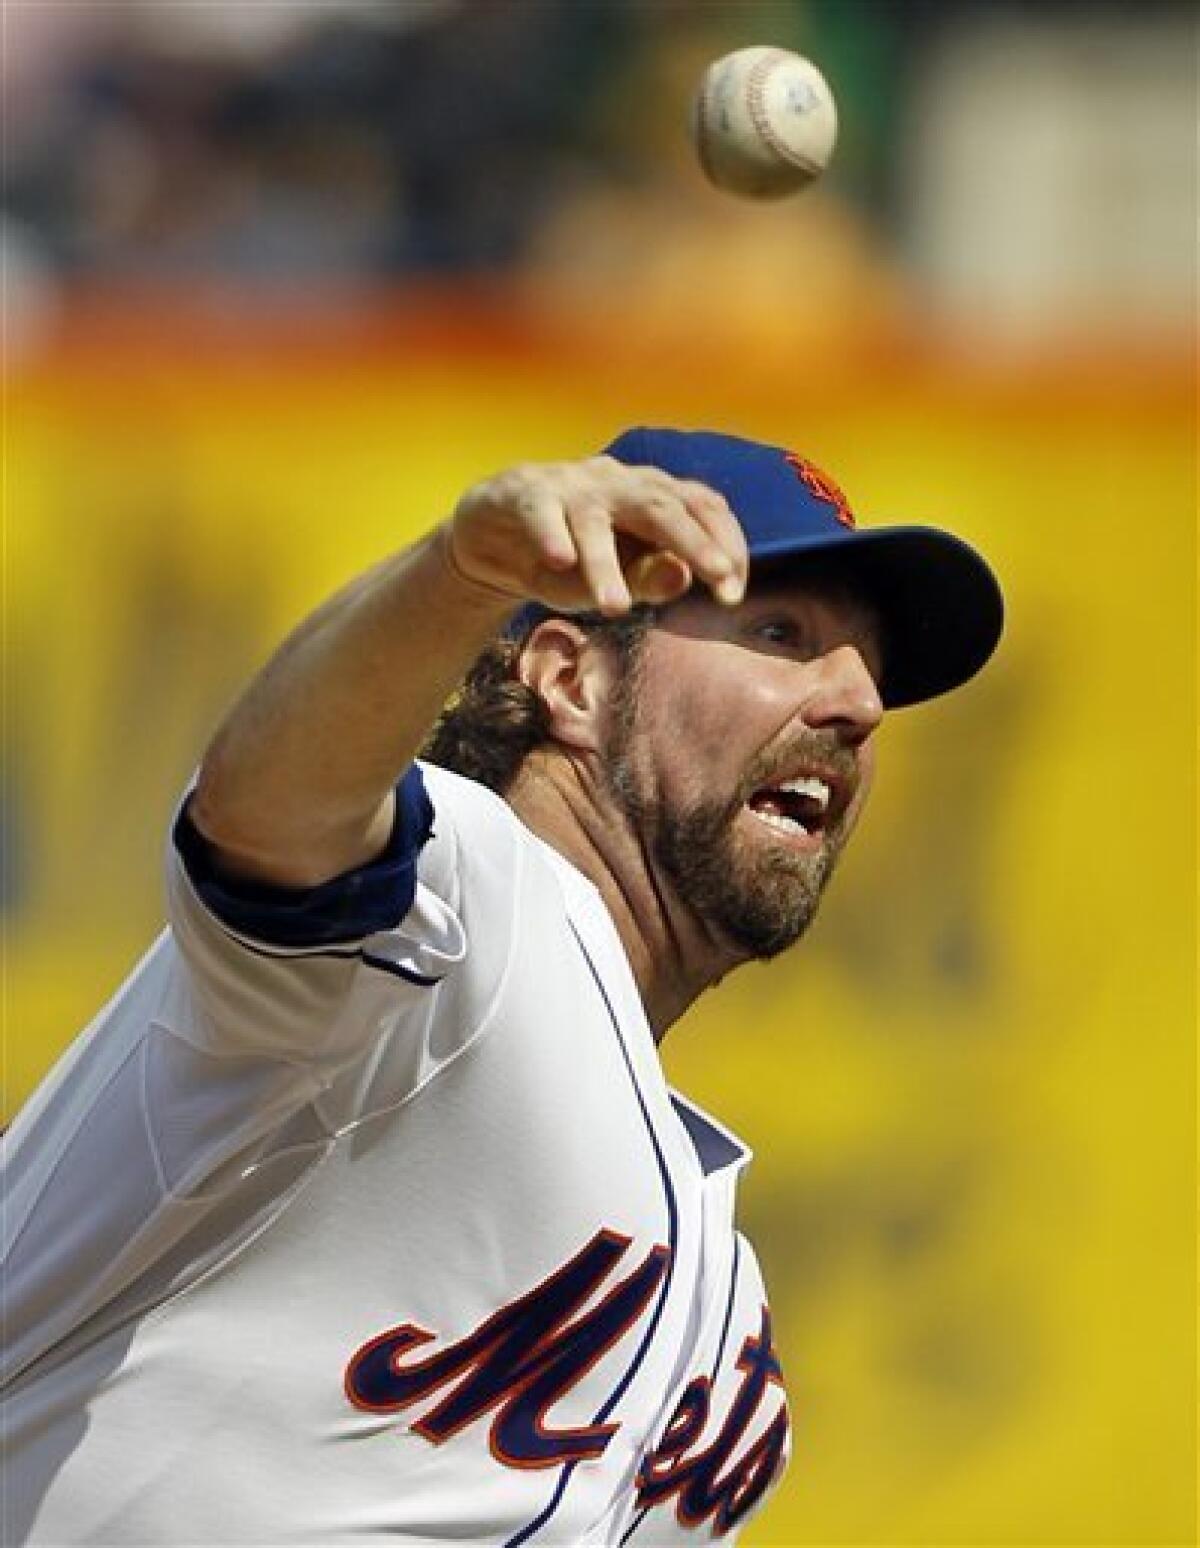 Mets trade Cy Young winner Dickey to Blue Jays - The San Diego Union-Tribune